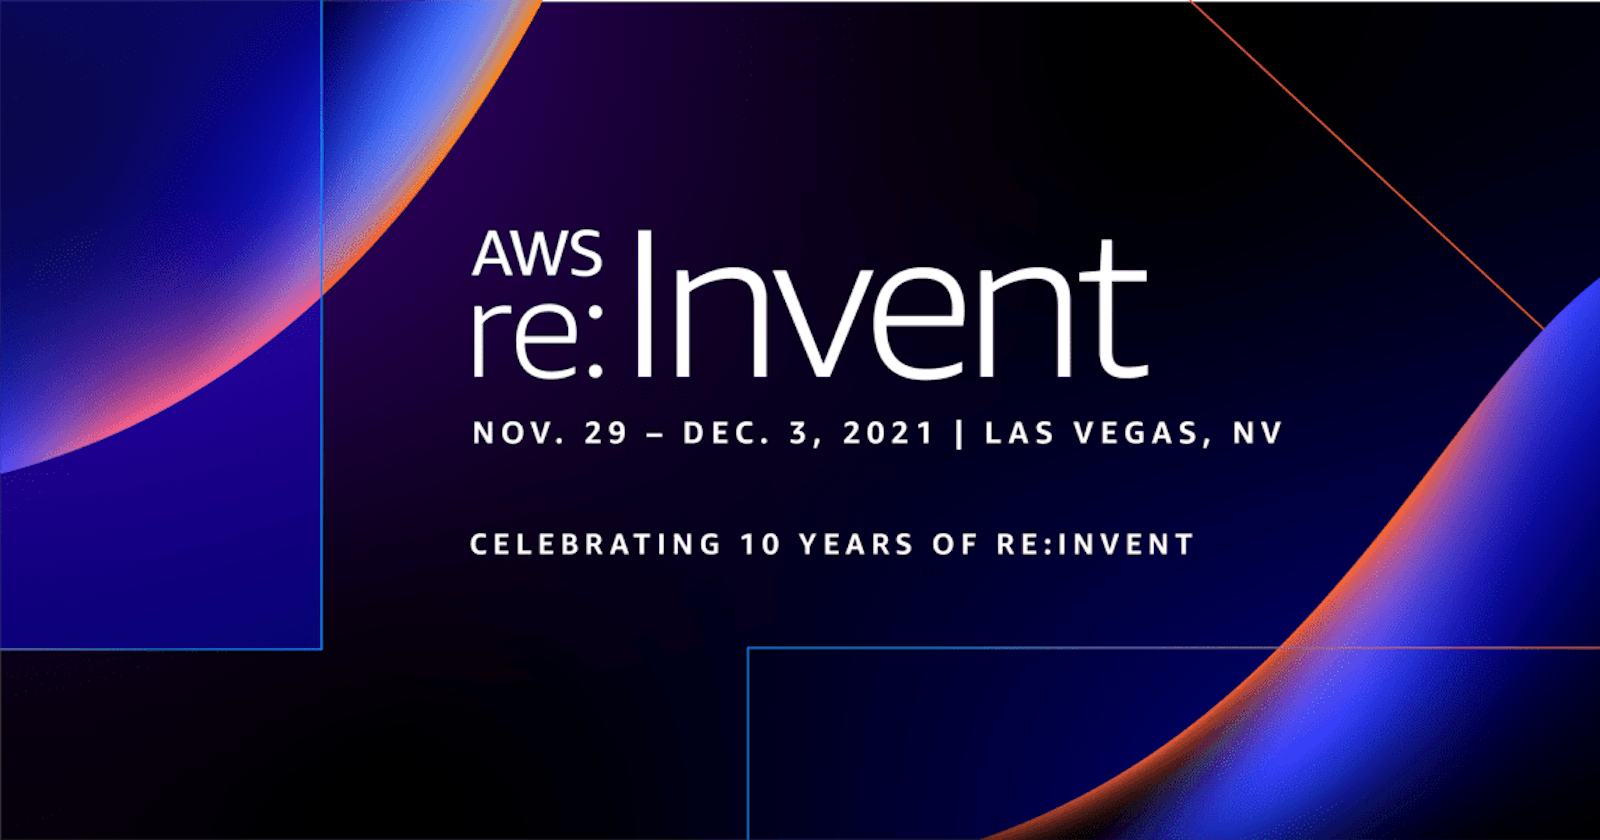 Top Takeaways from AWS re:Invent: 2021 Keynotes and Announcements